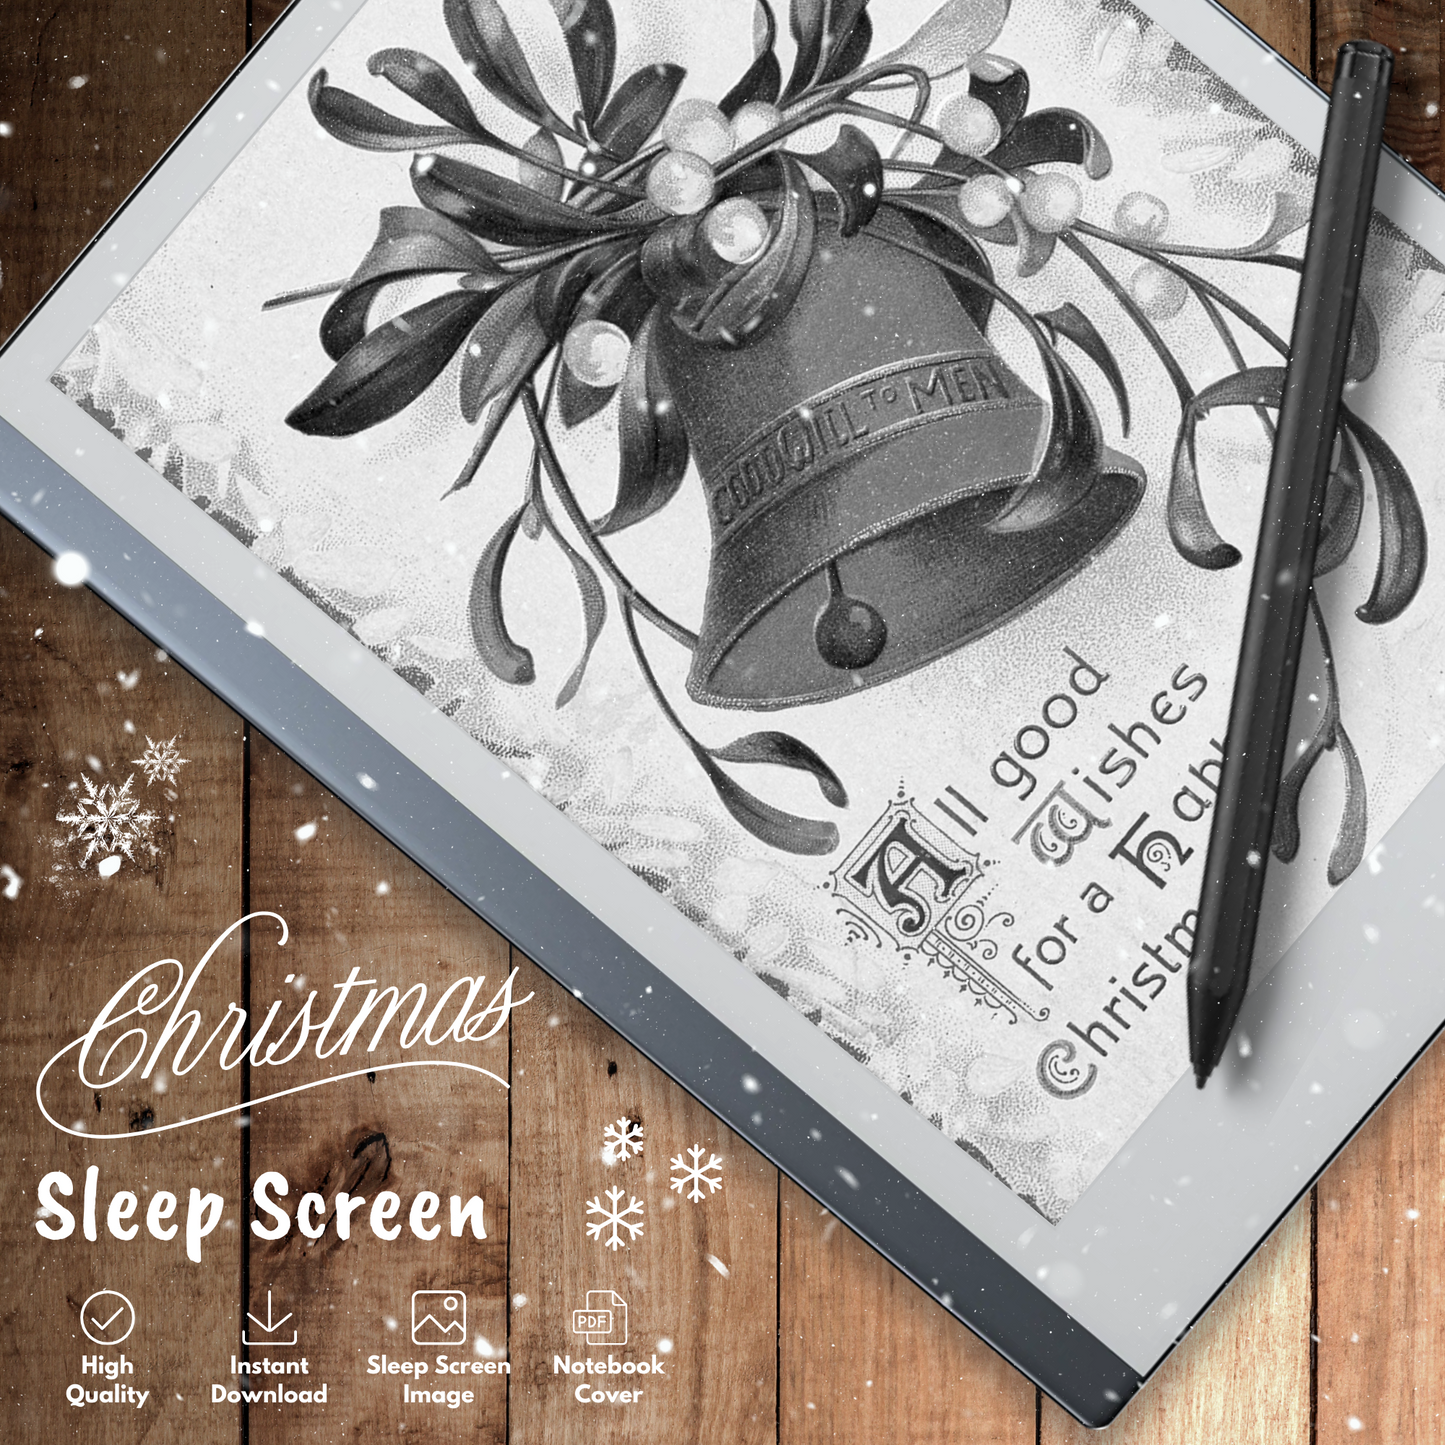 This is a Digital Download of Christmas Sleep Screen and Notebook Cover designed exclusively for Remarkable 2.